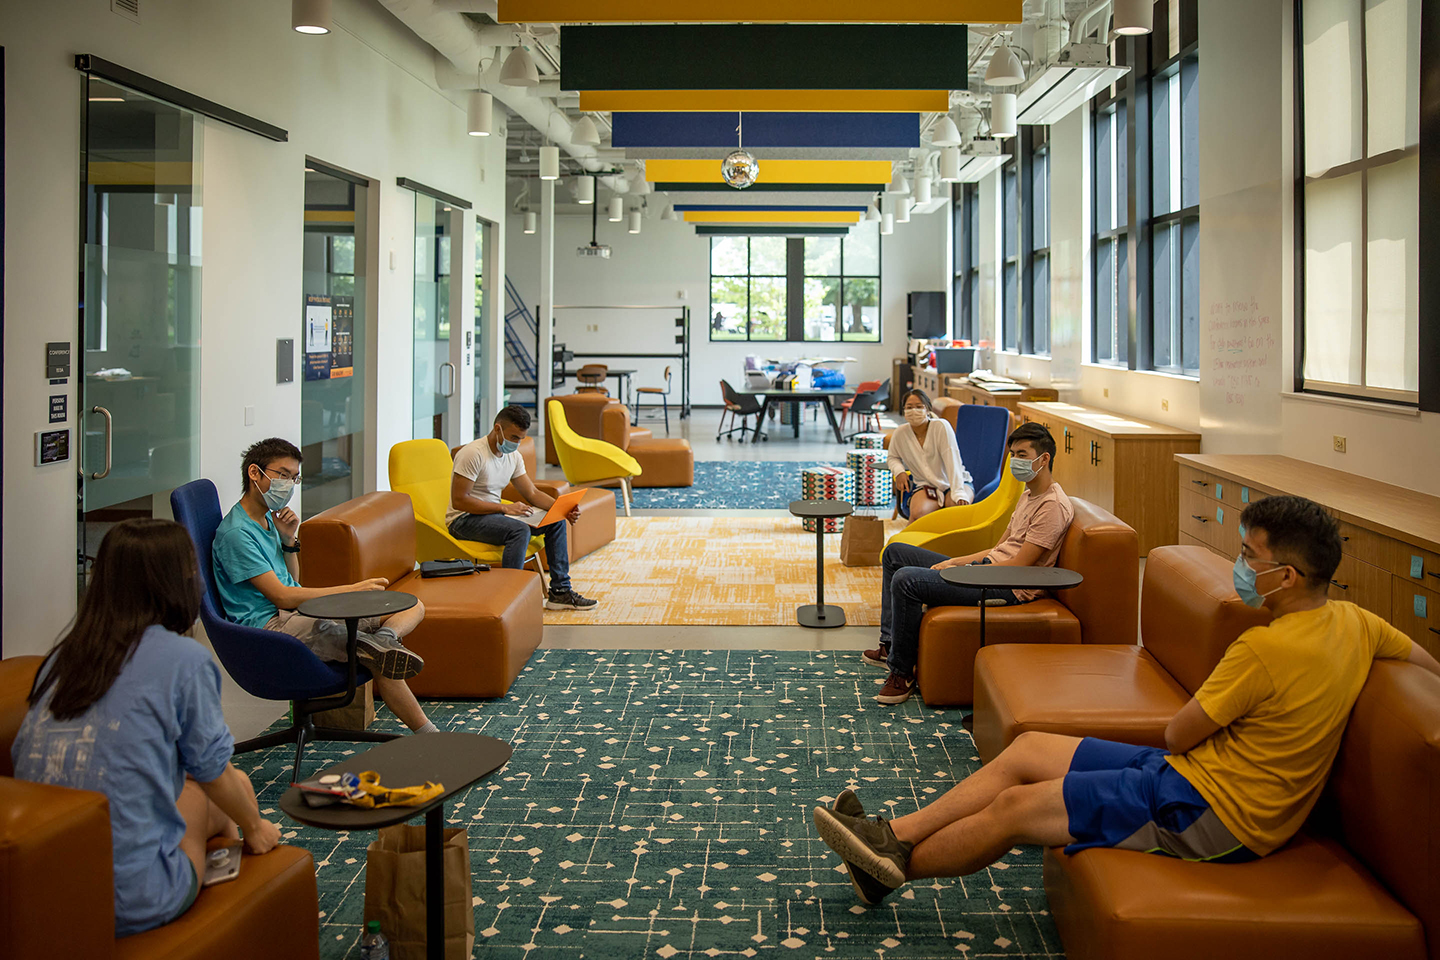 Students in the Oxford Student Center